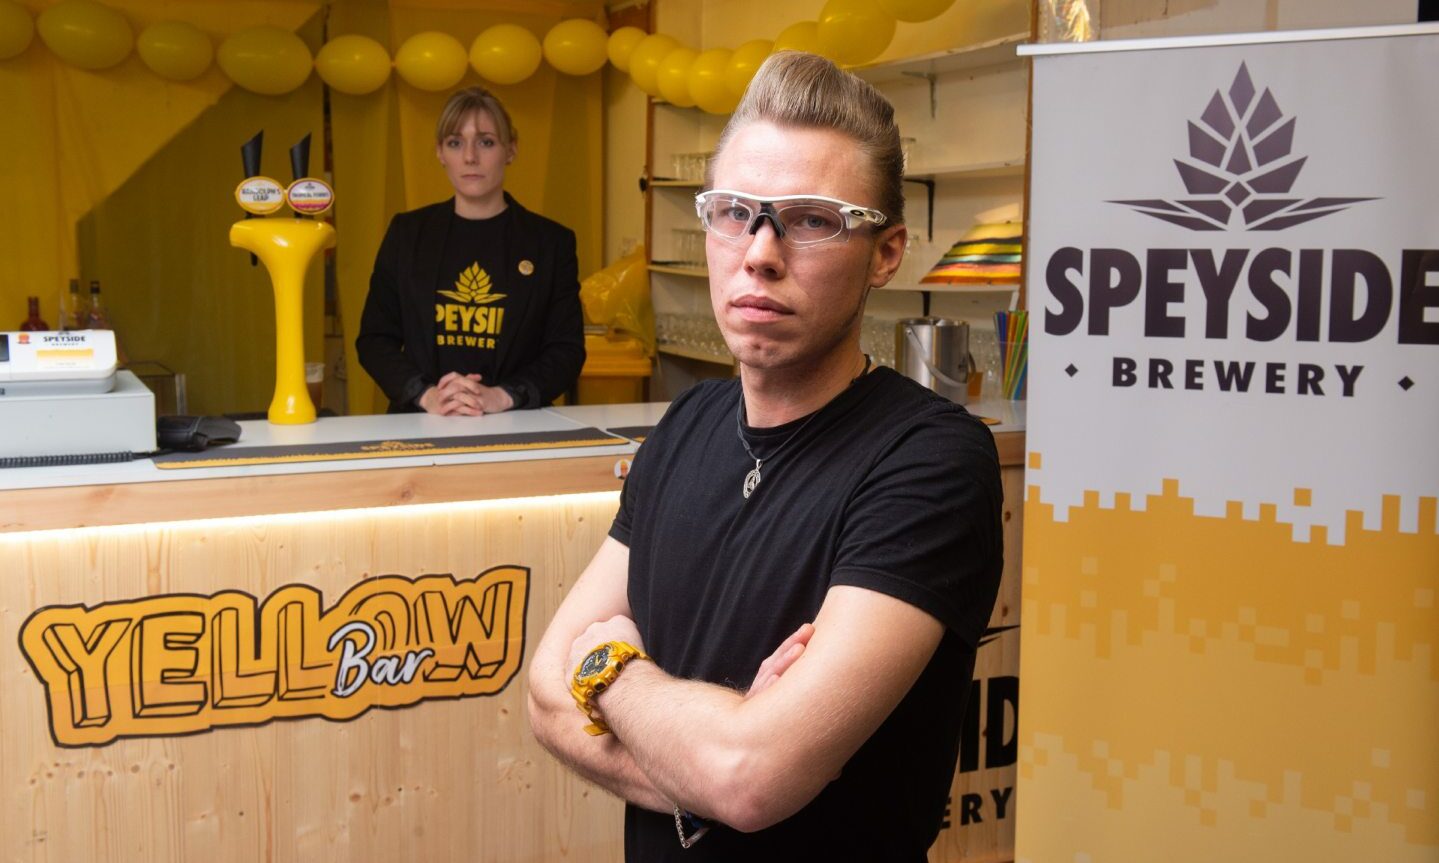 Seb Jones with arms folded standing in front of a bar with Yellow Bar branding, and a sign with Speyside Brewery branding. 